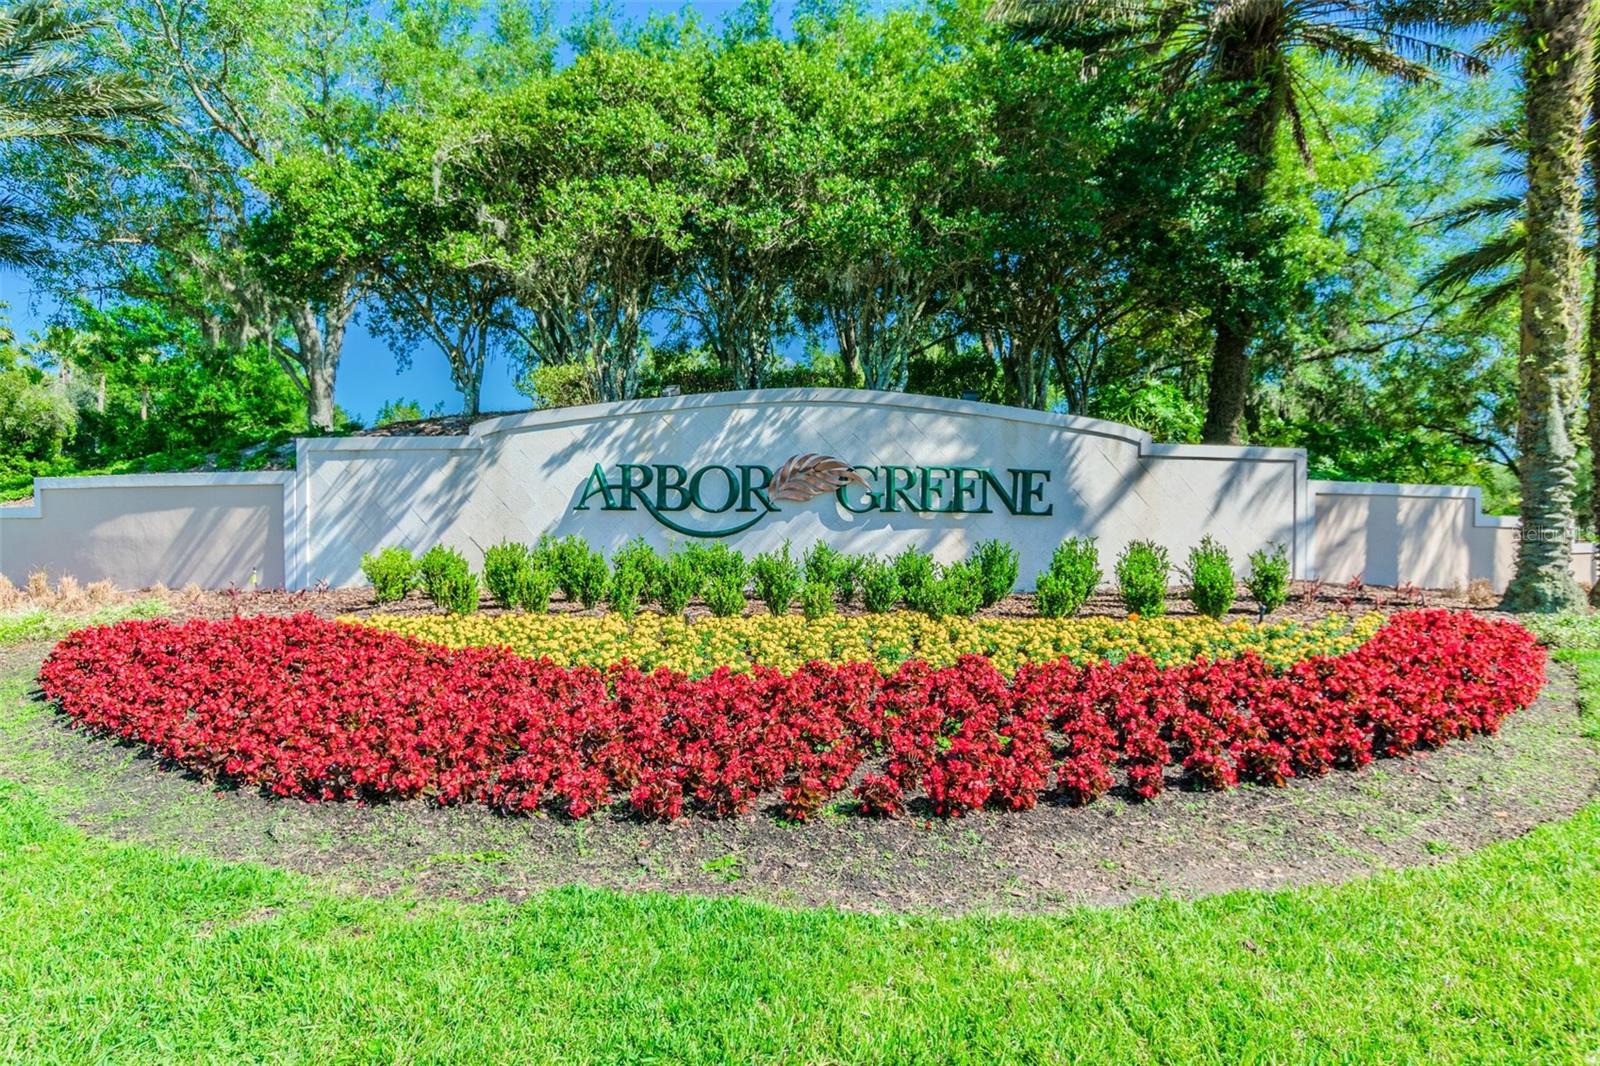 Entrance to the Community of Arbor Greene